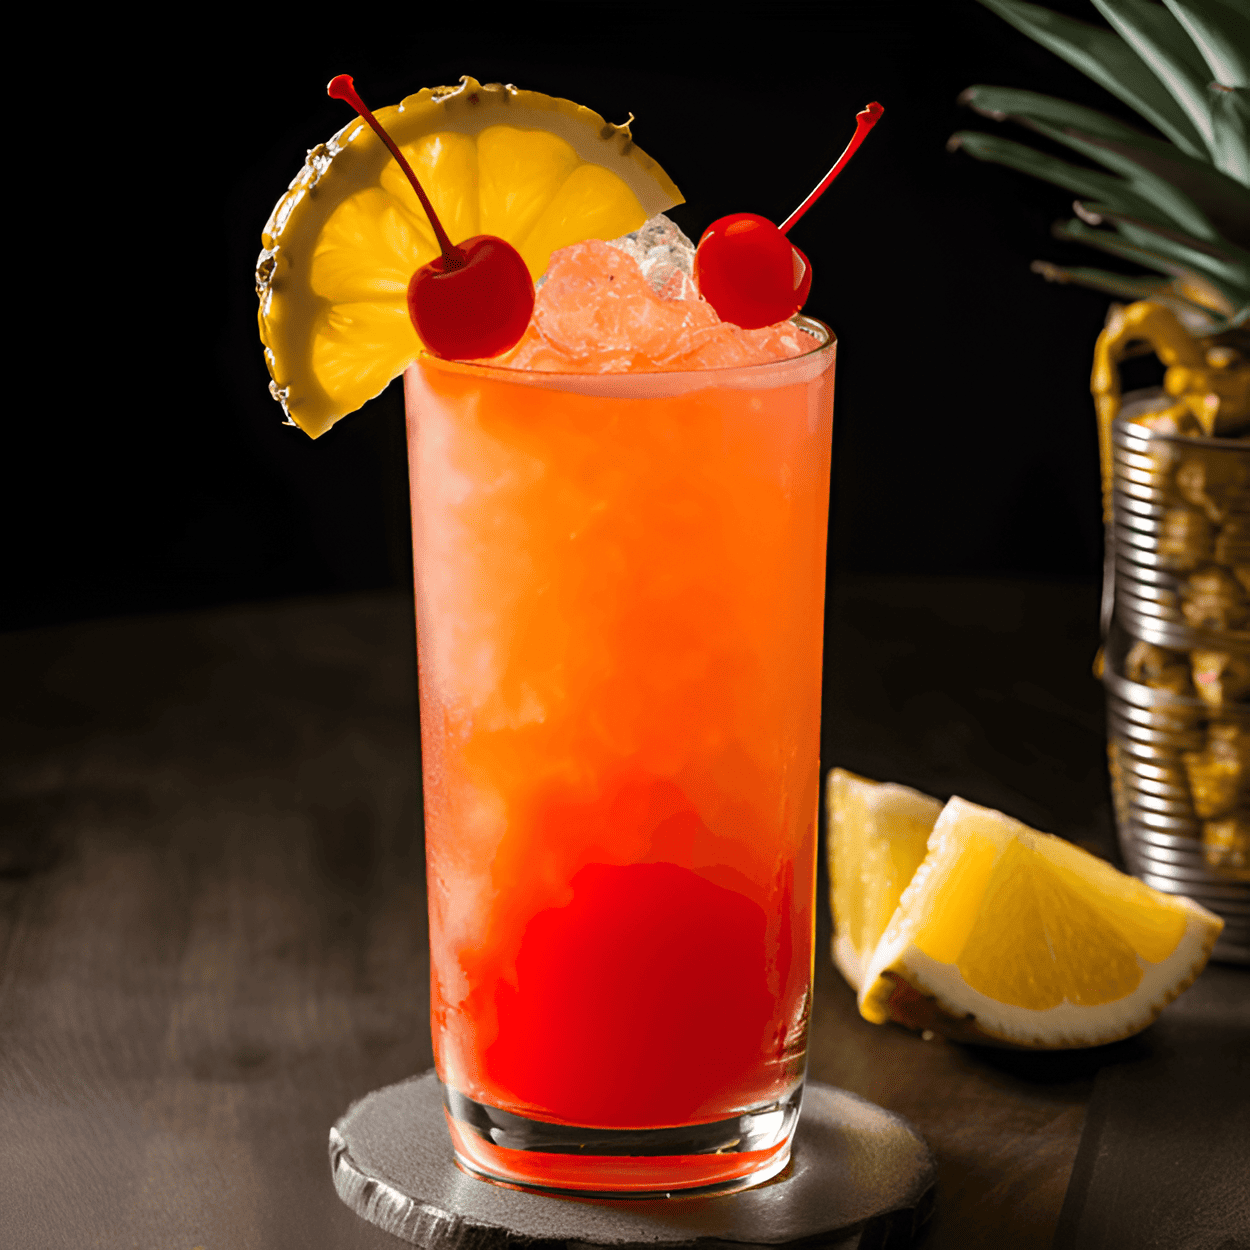 Beach Bum Cocktail Recipe - The Beach Bum cocktail is a delightful blend of sweet, sour, and fruity flavors. The rum gives it a strong, robust flavor, while the pineapple and orange juices add a sweet, tropical taste. The grenadine adds a hint of tartness, making it a well-rounded, refreshing drink.